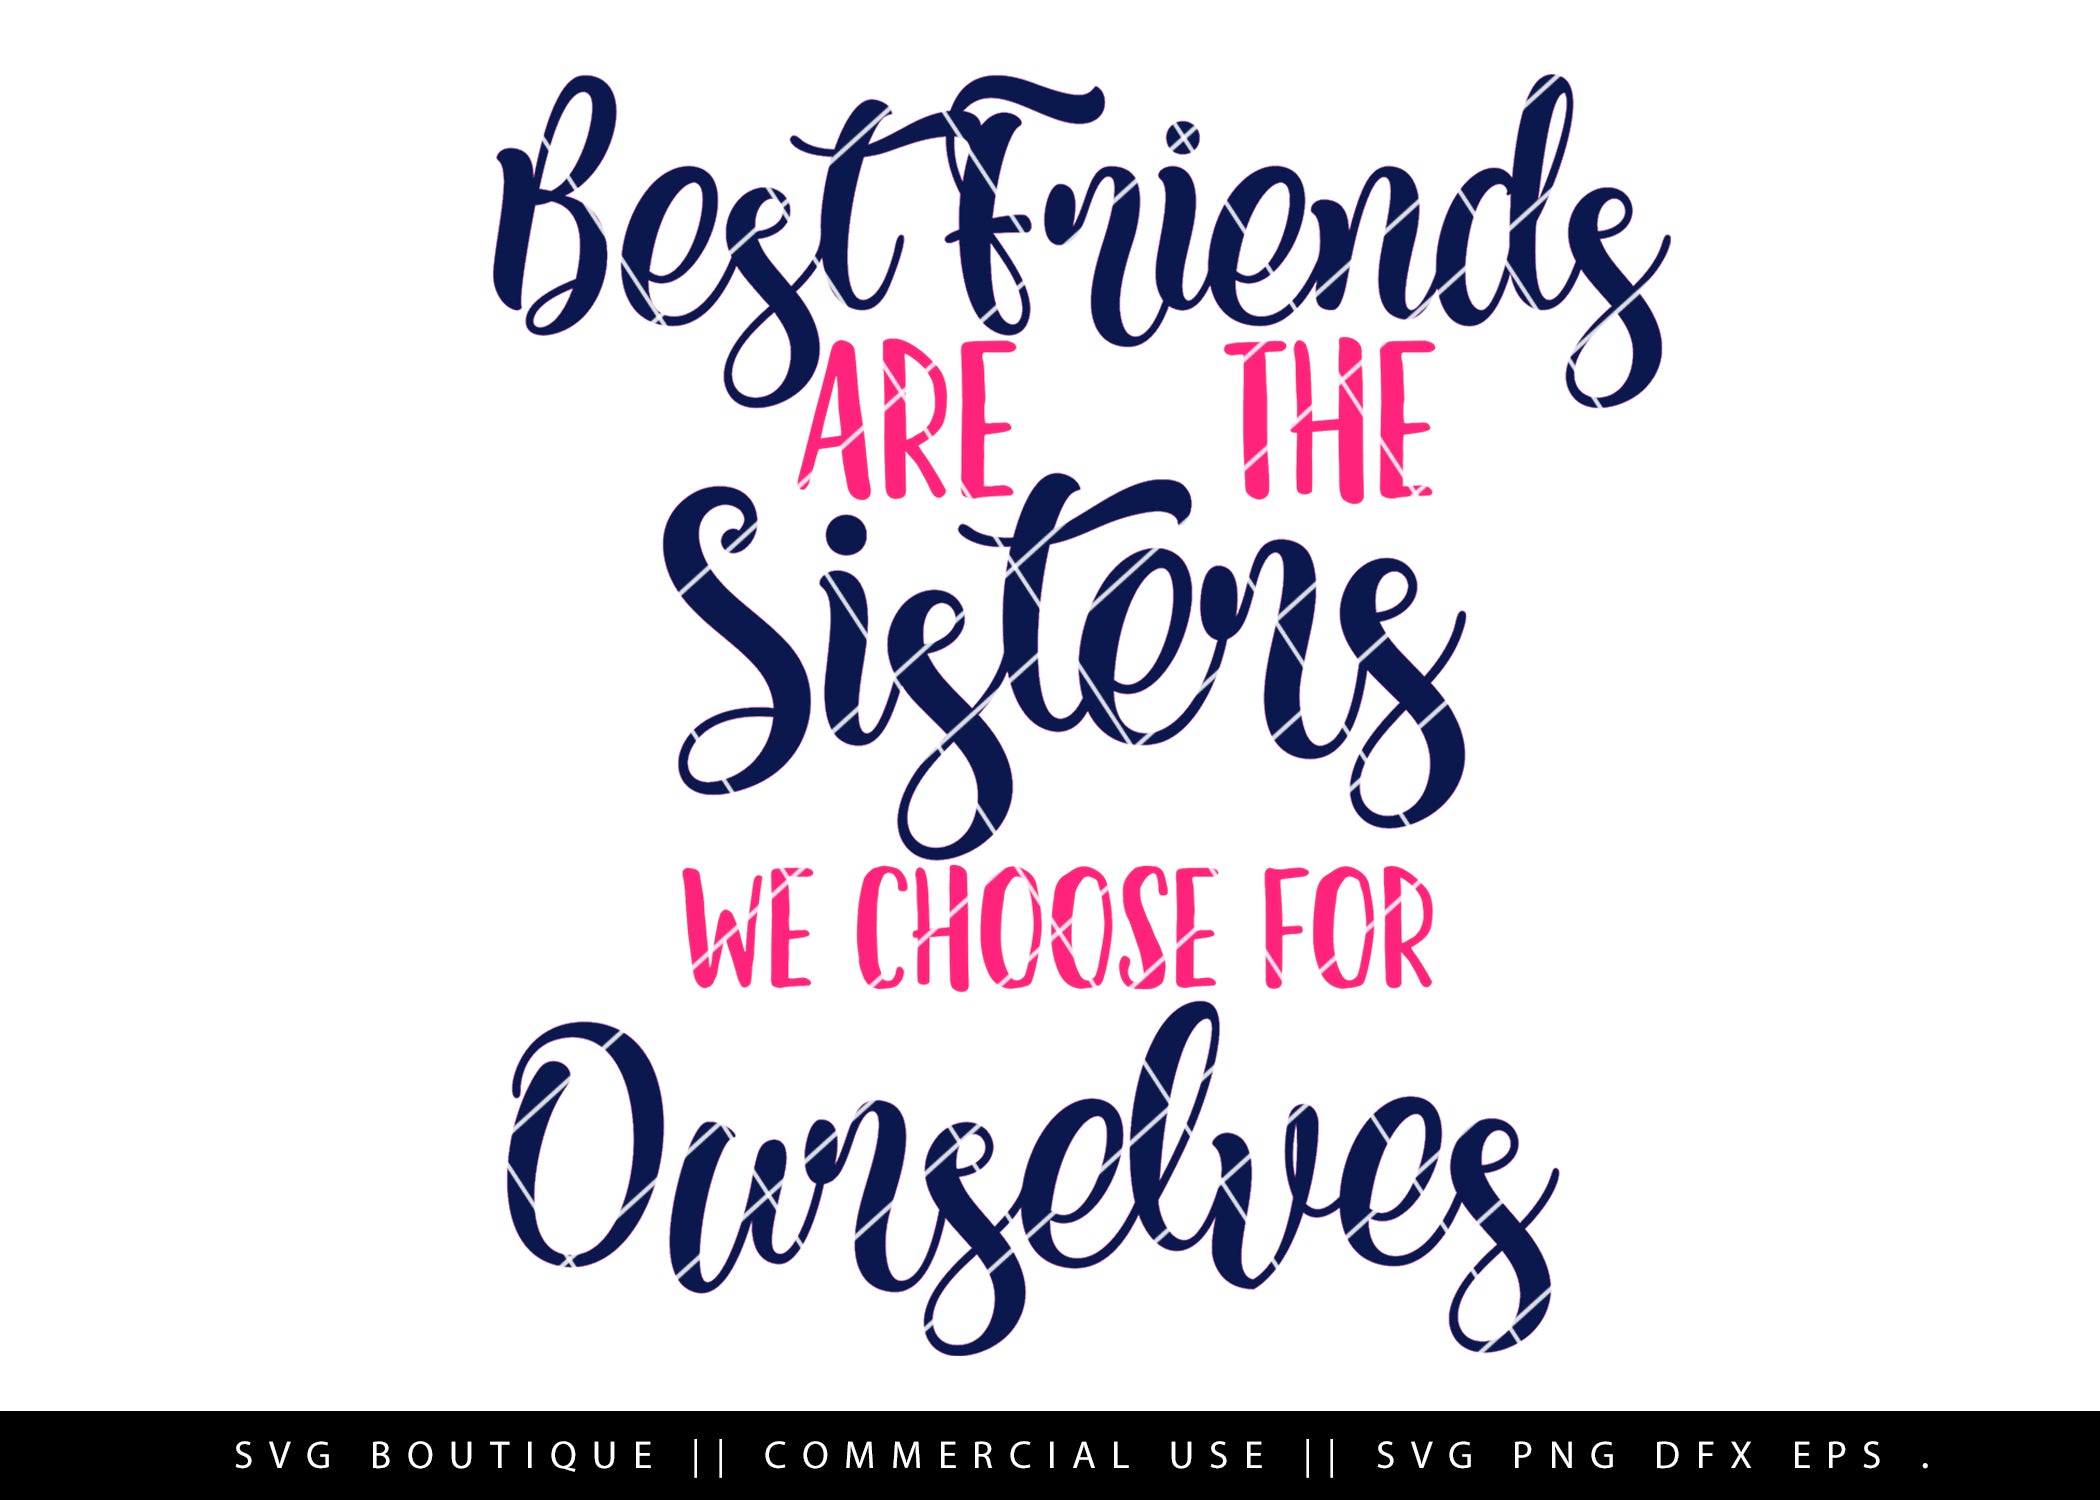 Download Best Friends Are Sisters We Choose For Ourselves Svg Cut File Svg Boutique